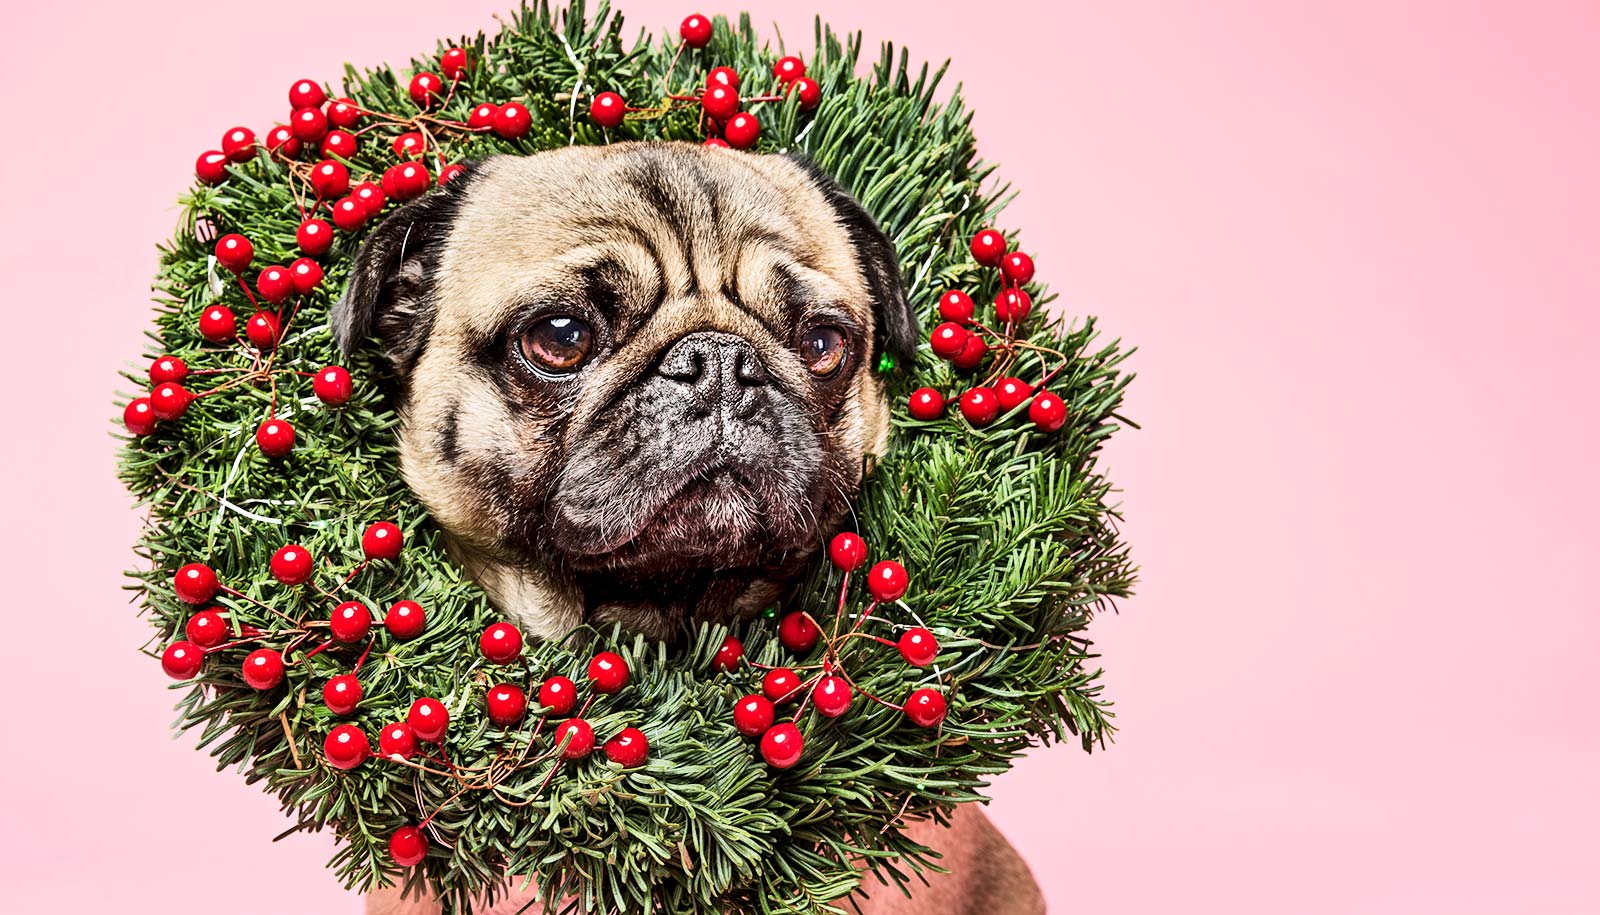 A pug dog with a wreath covered in red cranberries around its neck.